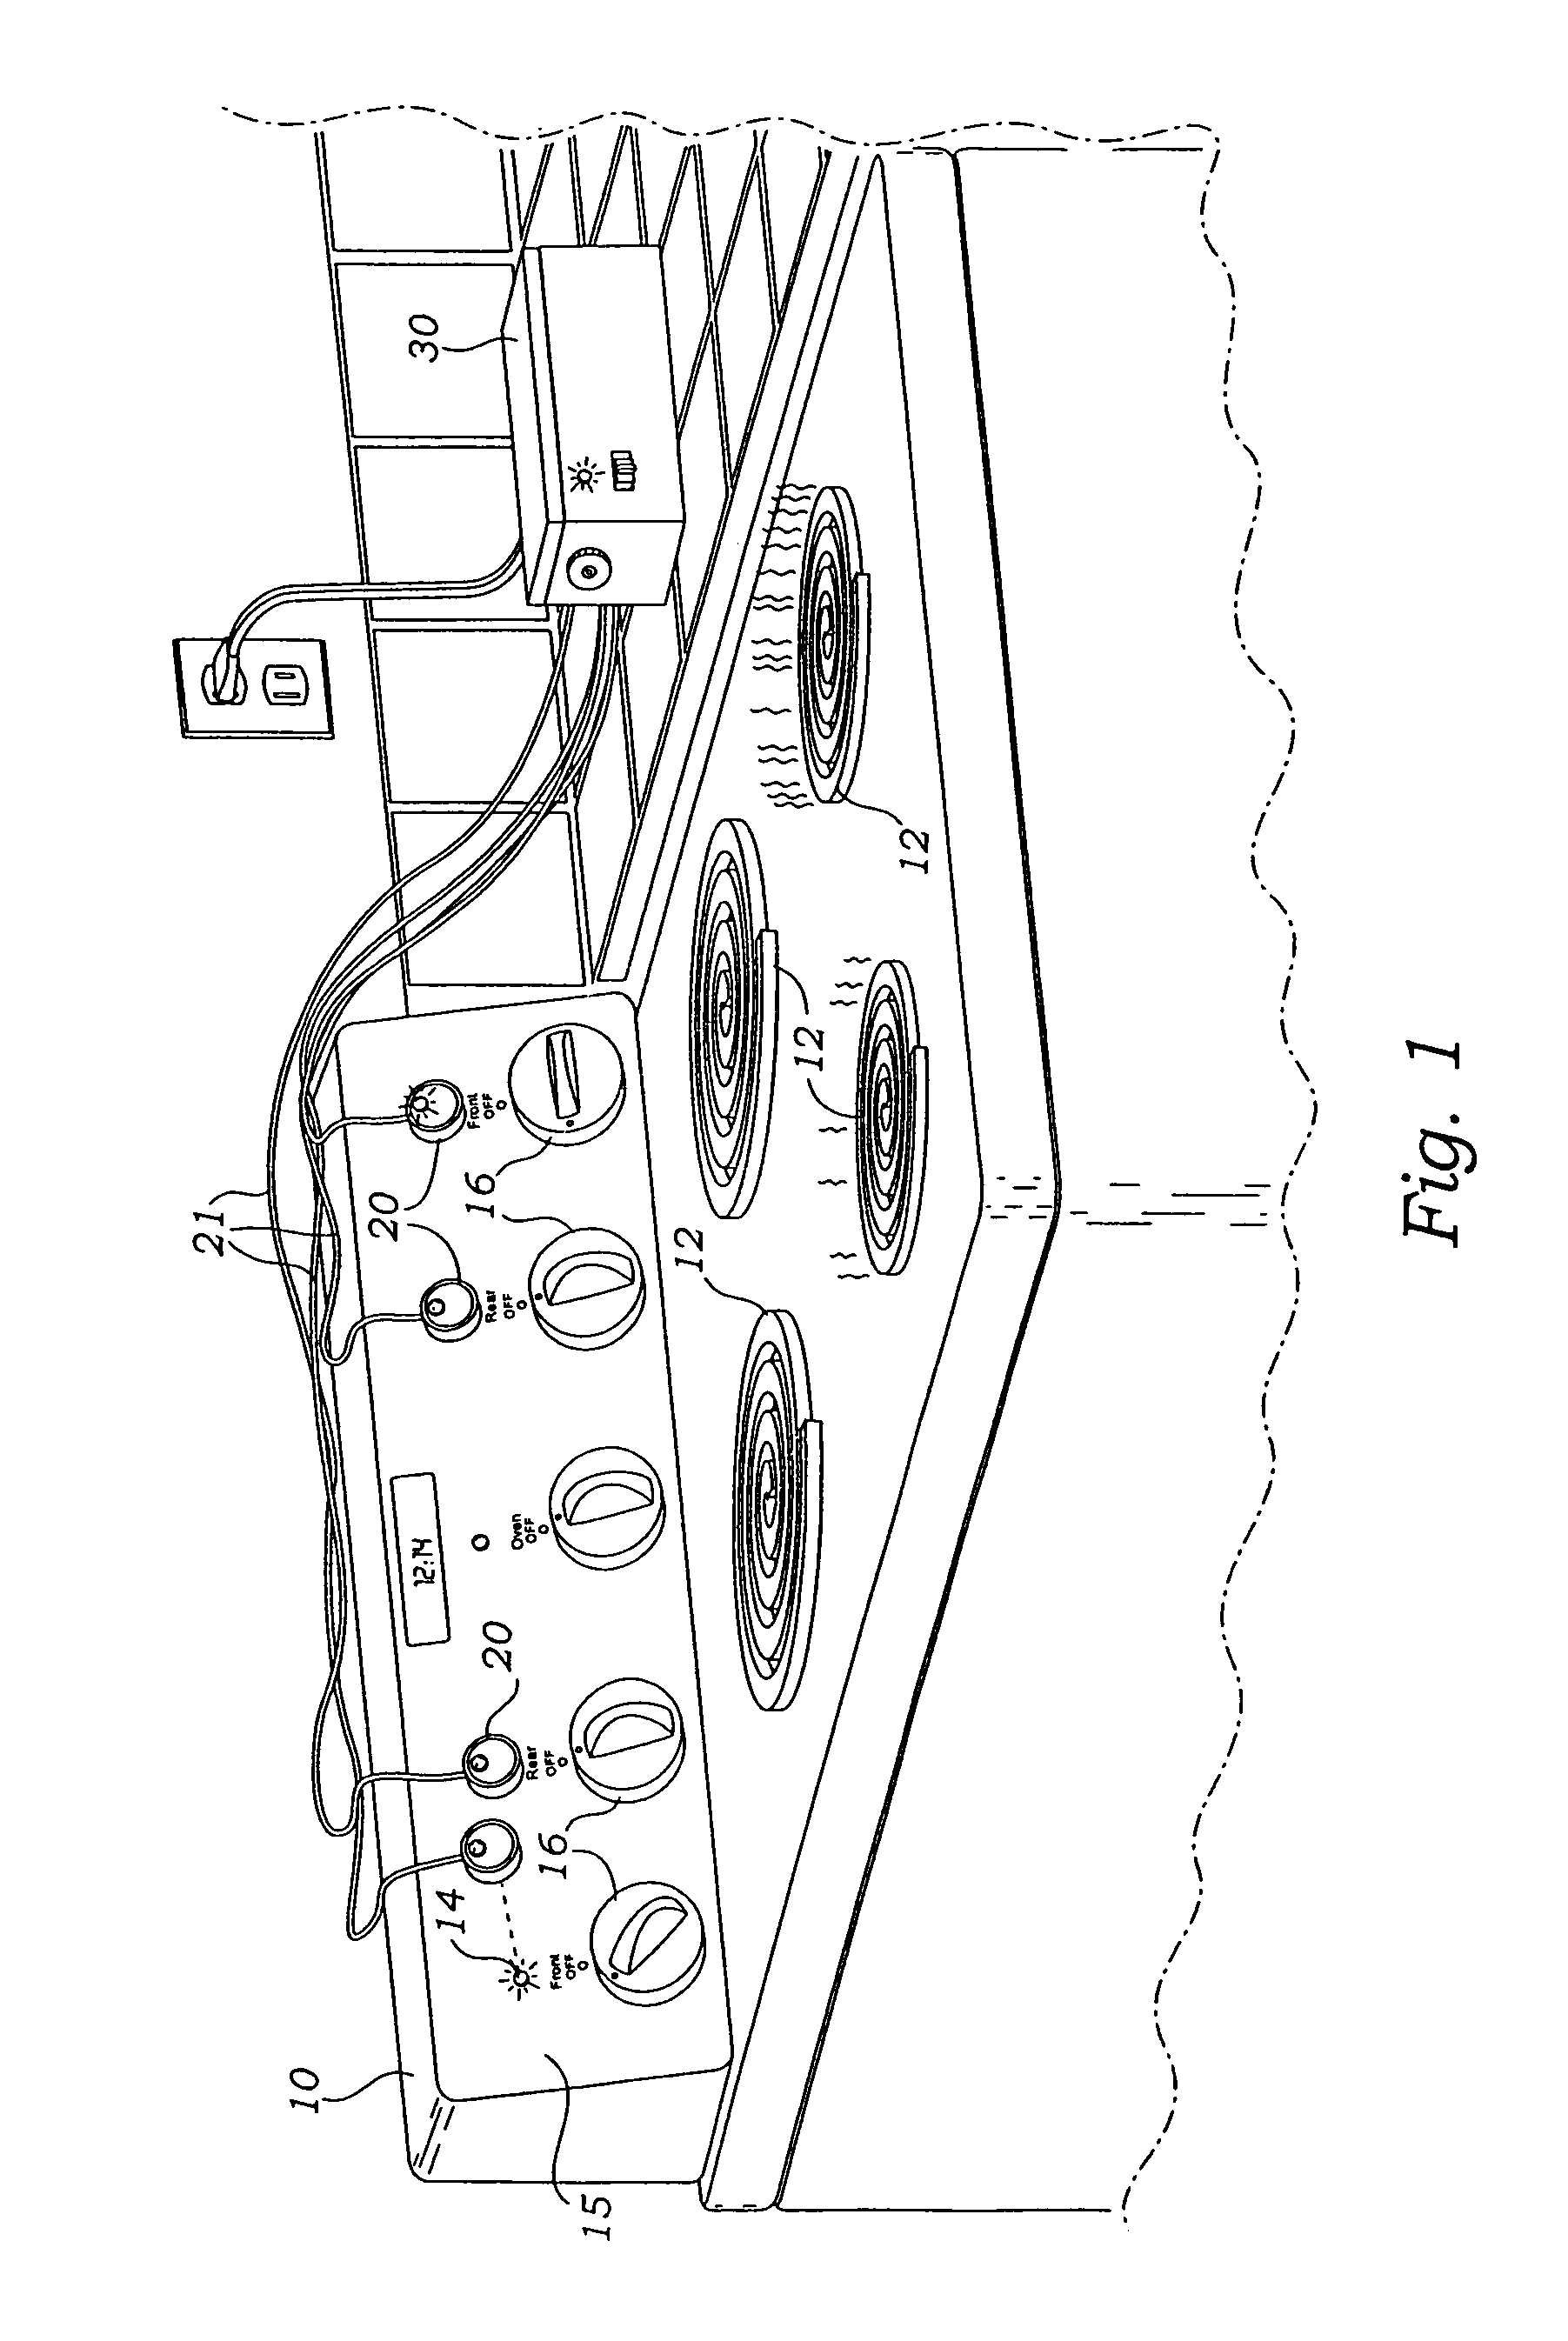 Automatic stove timer and alarm apparatus and method of use